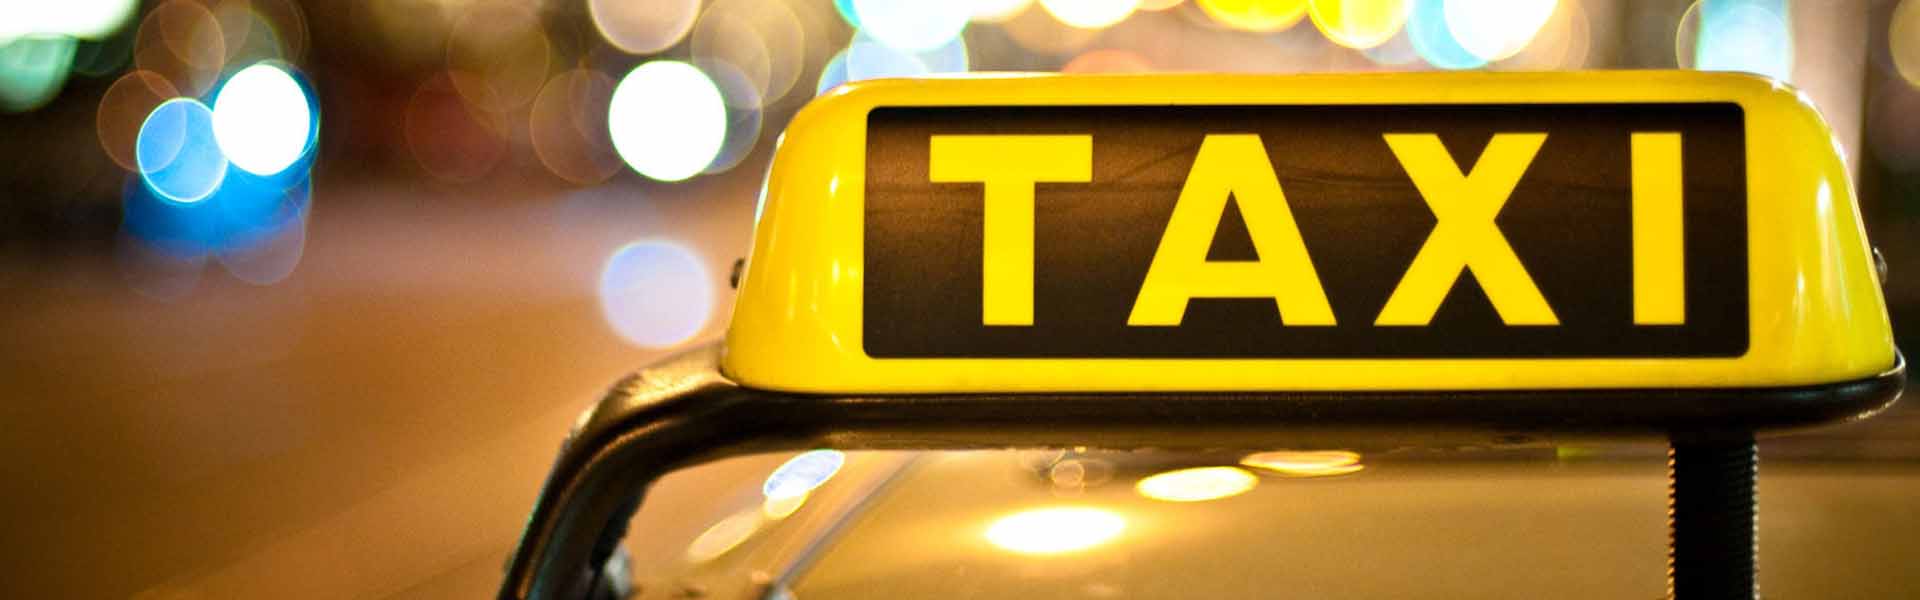 Rent a car or taxi - what to choose? 